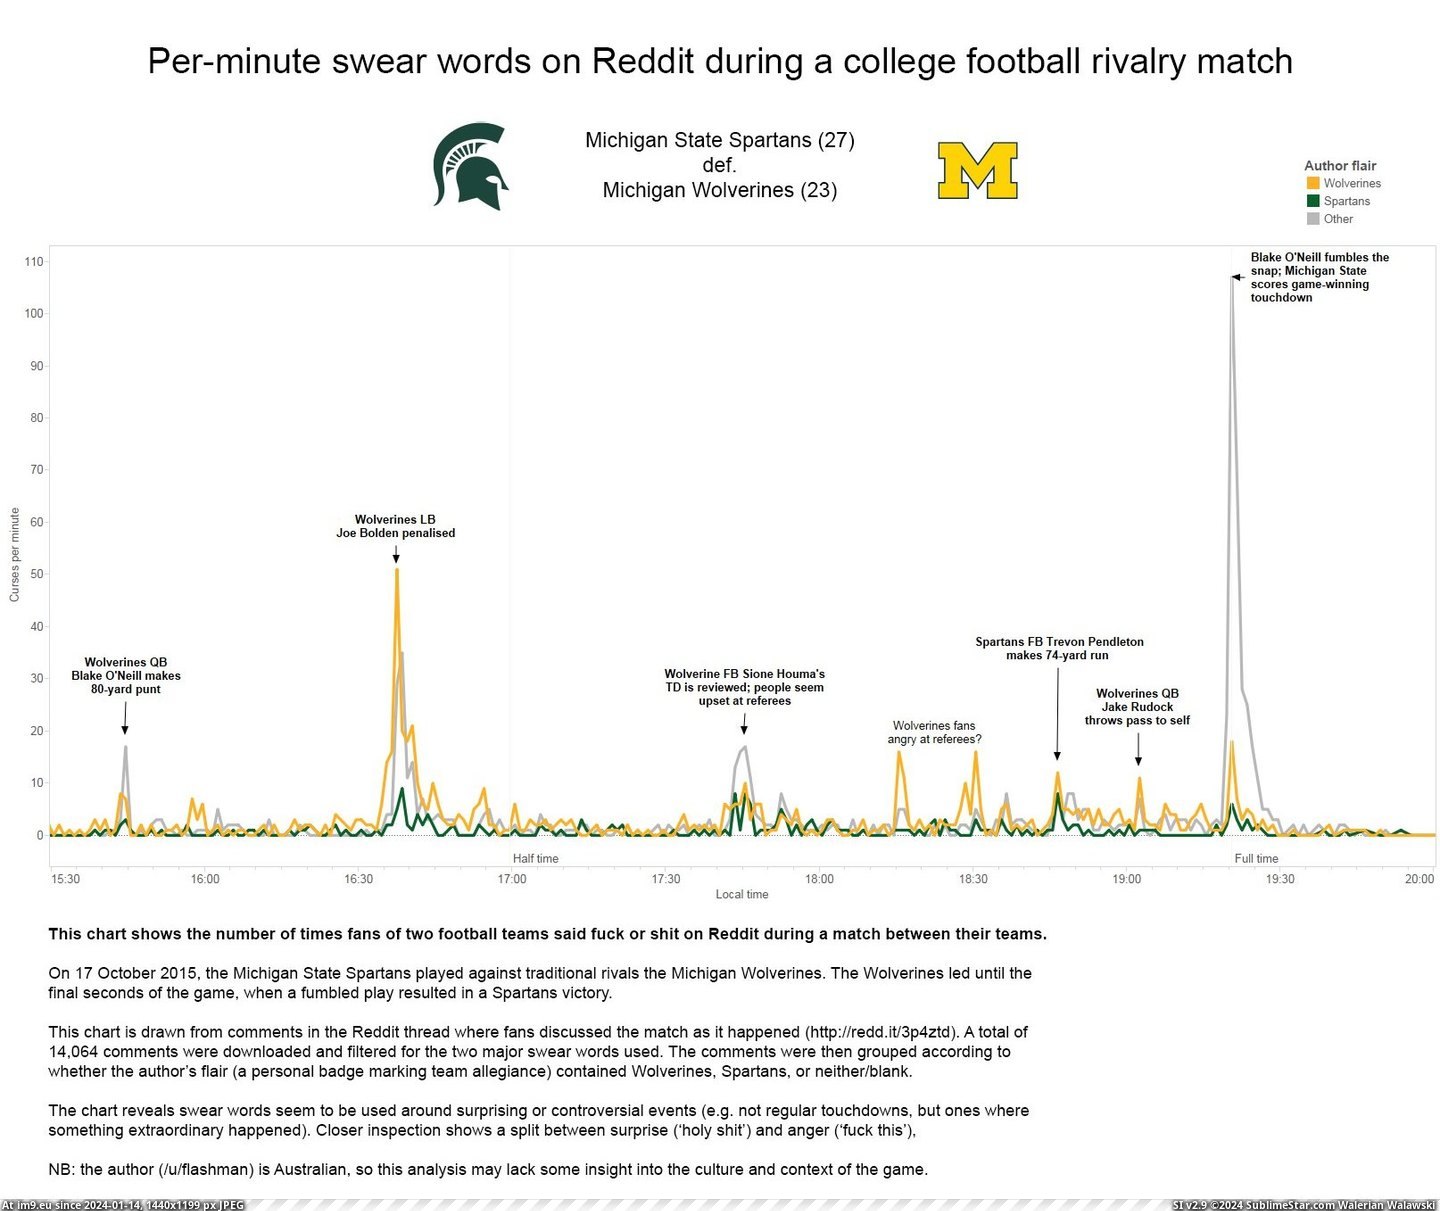 [Dataisbeautiful] Swear words per minute on Reddit during a college football rivalry match (in My r/DATAISBEAUTIFUL favs)